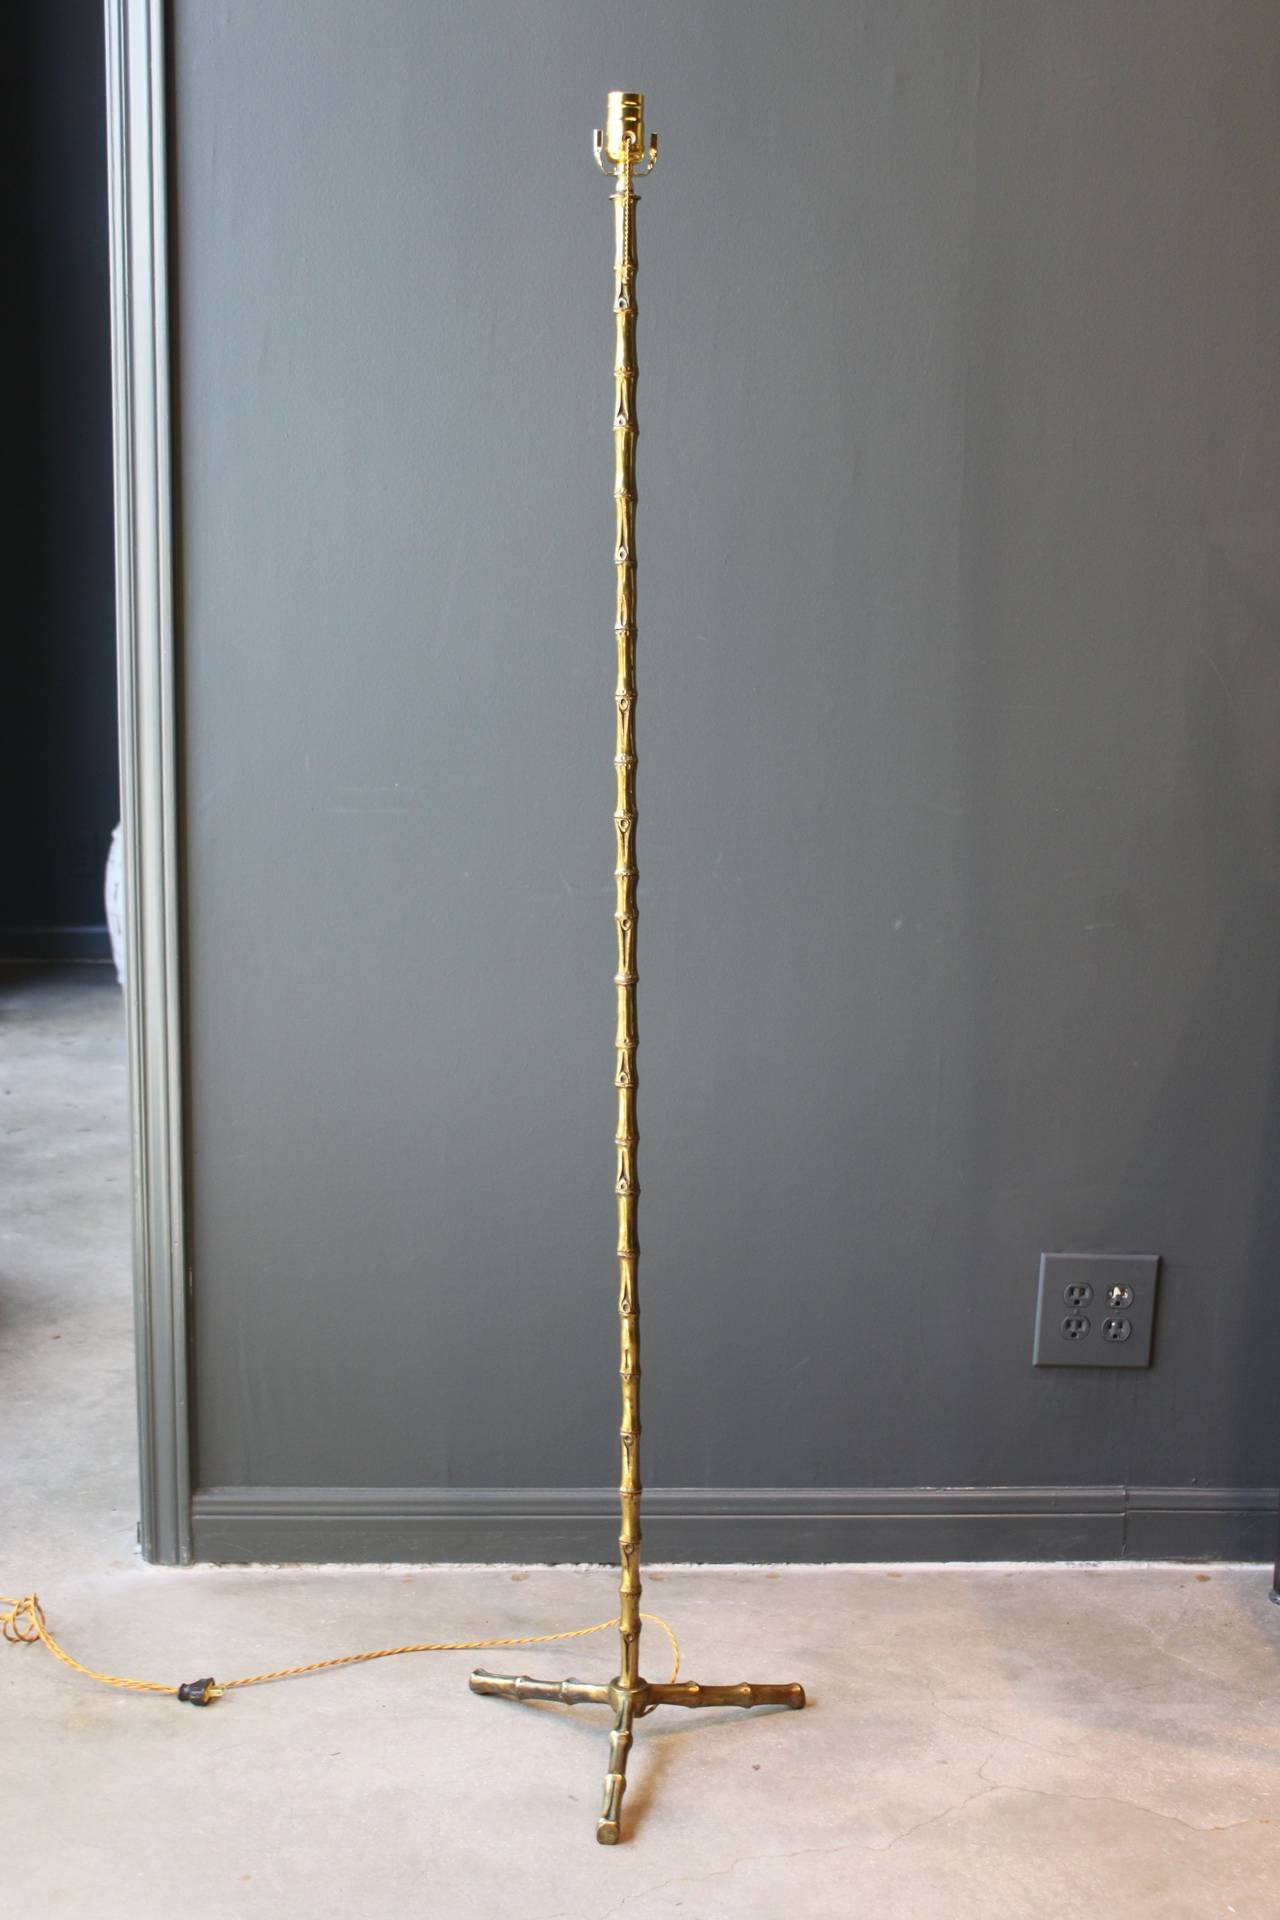 Maison Baguès faux bamboo brass tripod floor lamp, France, mid-20th century. This floor lamp has been newly wired and is 61